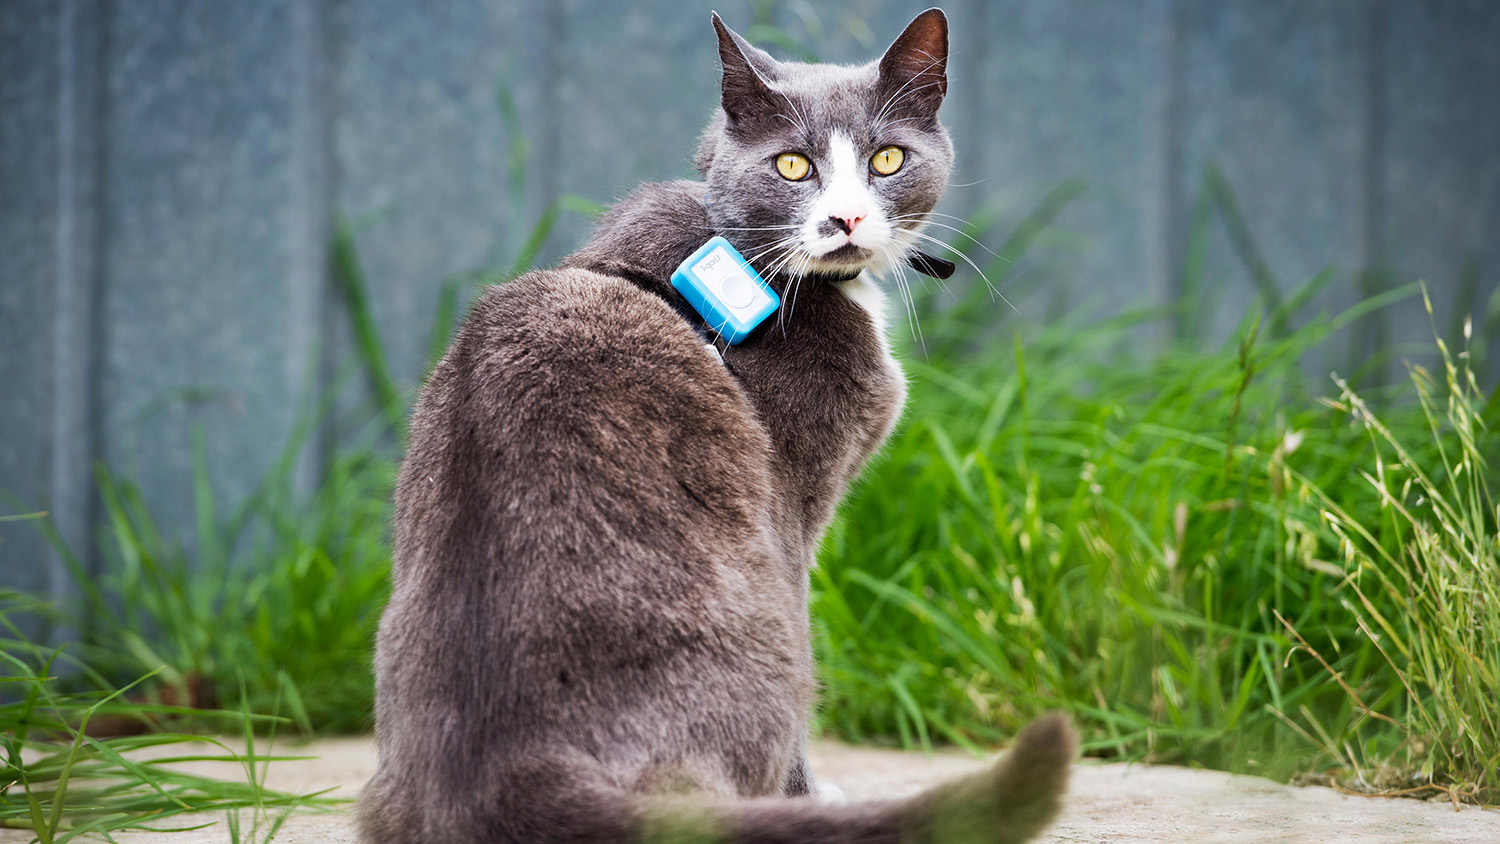 Cat with GPS tracking device on collar - Keeping Cats Indoors Could Blunt Adverse Effects to Wildlife -Forestry and Environmental Resources NC State University